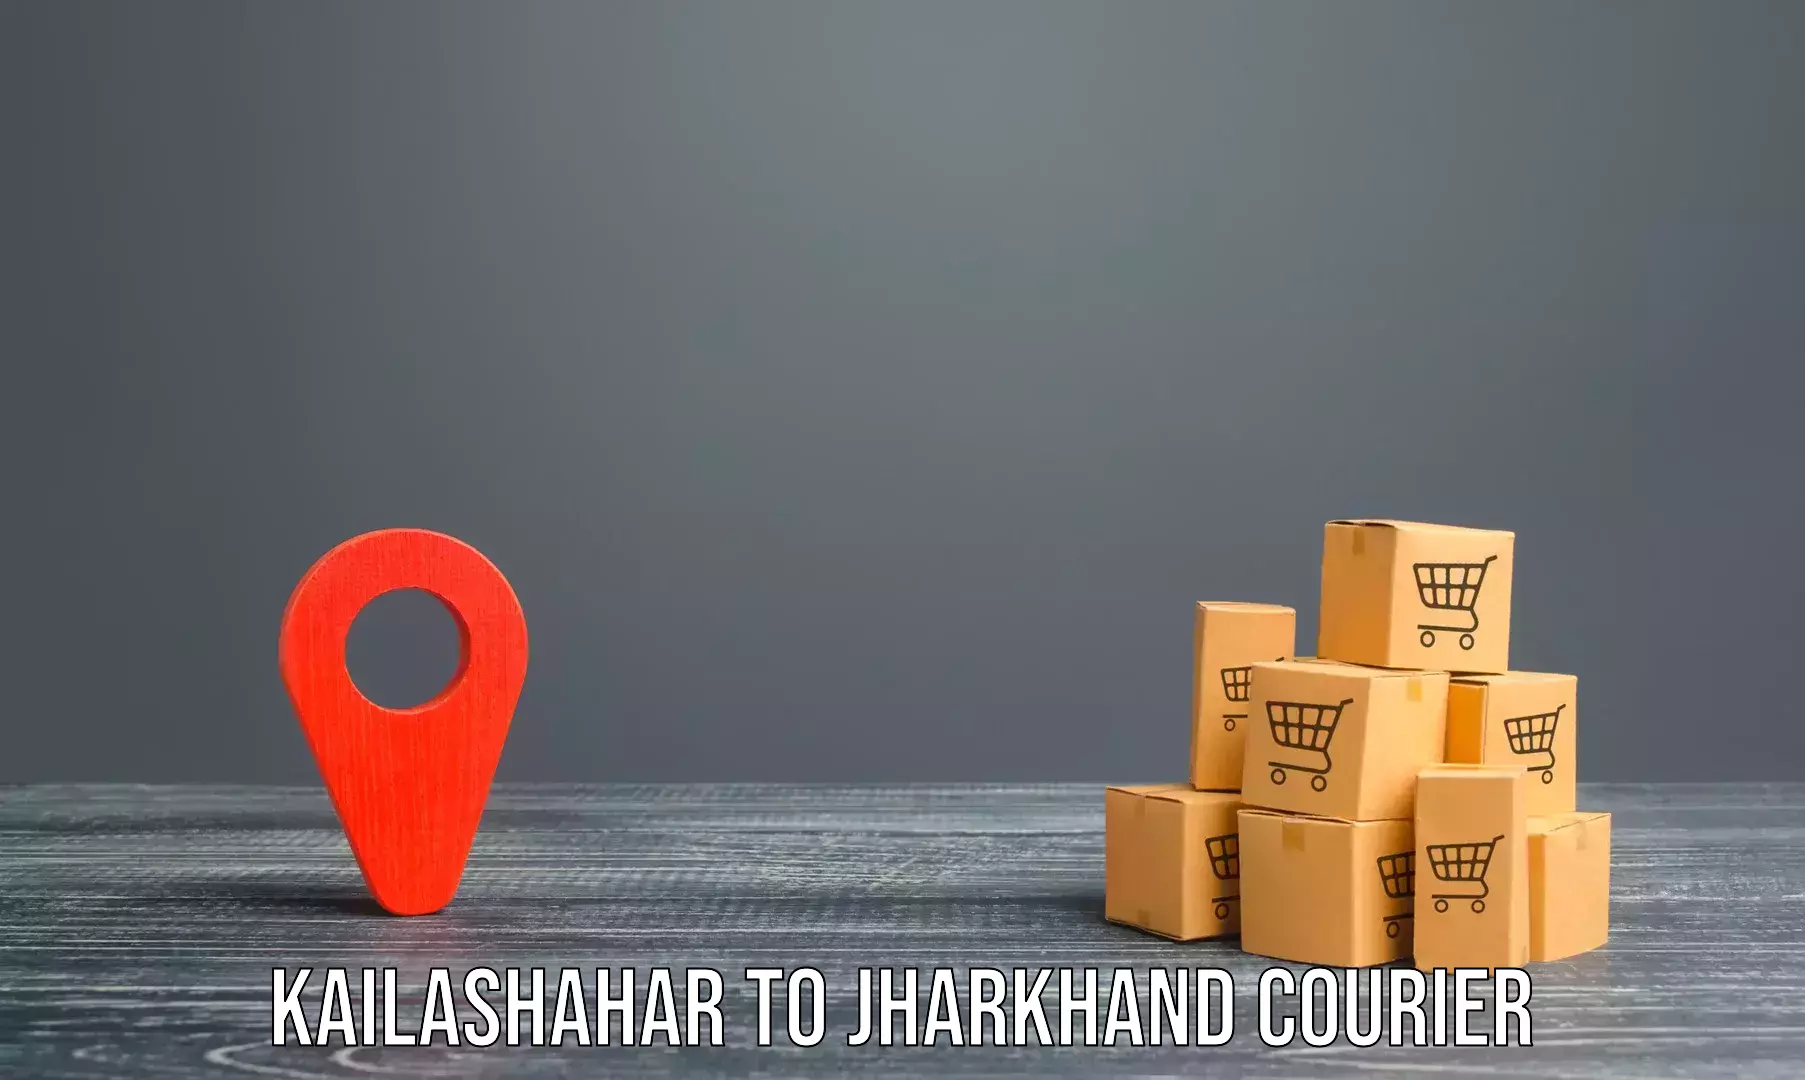 Nationwide household movers Kailashahar to Dhanbad